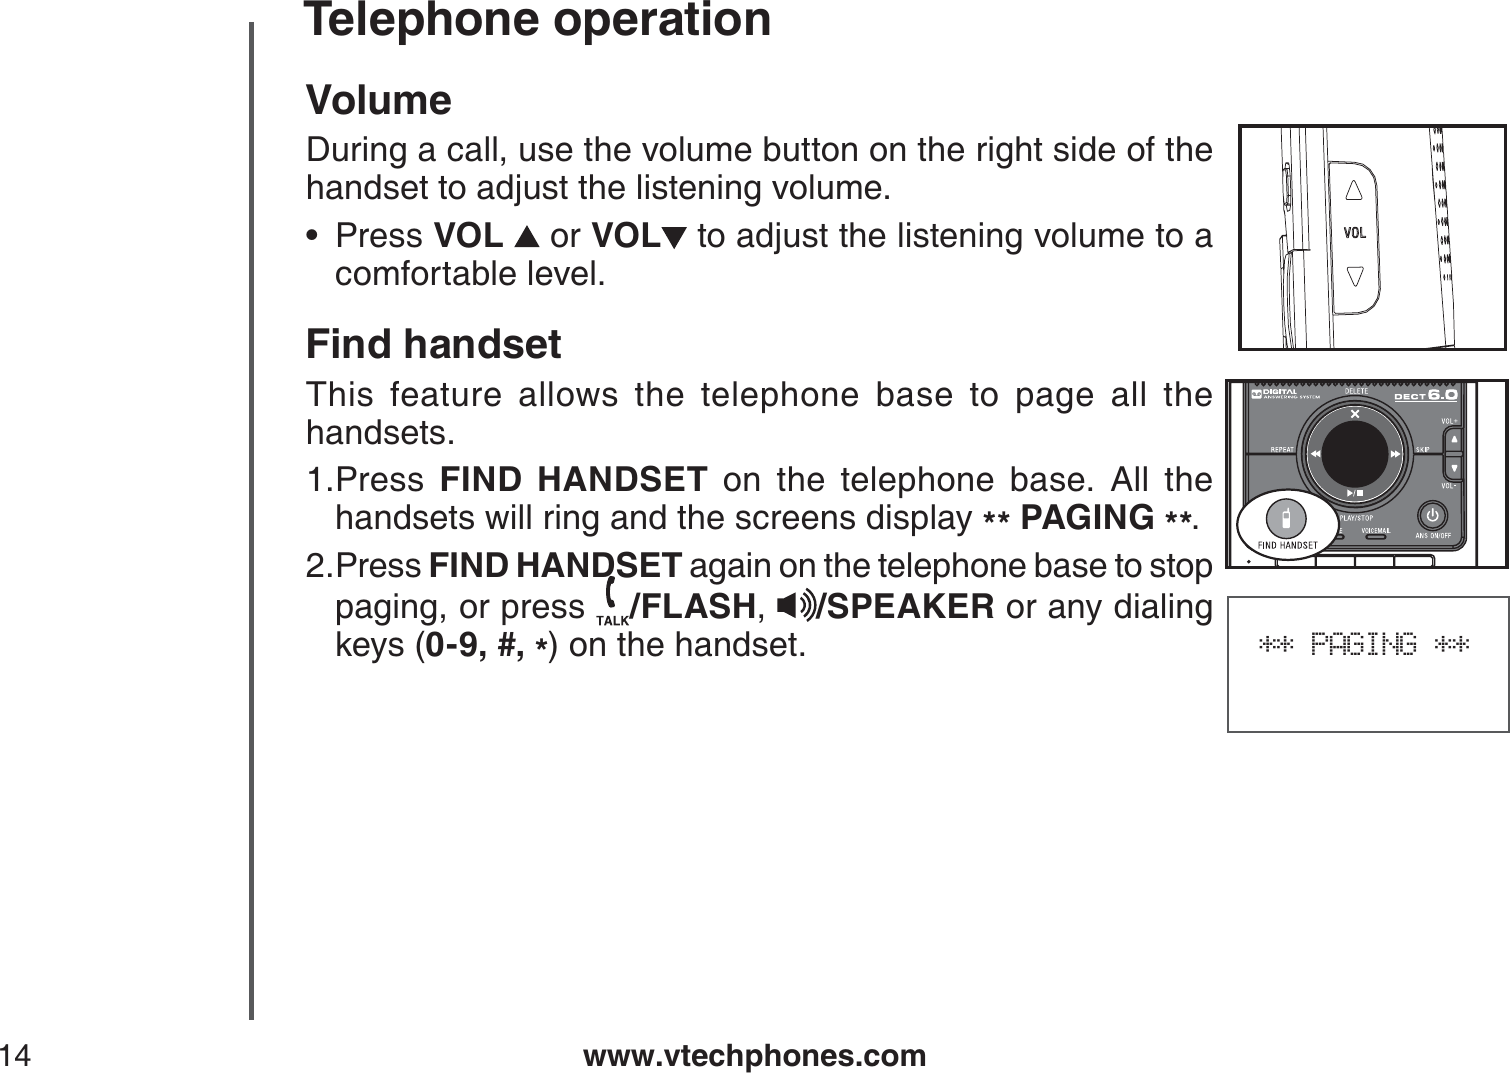 www.vtechphones.com14Telephone operation** PAGING **VolumeDuring a call, use the volume button on the right side of the handset to adjust the listening volume.Press VOL  or VOL  to adjust the listening volume to a comfortable level.Find handsetThis feature allows the telephone base to page all the handsets.Press  FIND HANDSET on the telephone base. All the handsets will ring and the screens display ** PAGING **.Press FIND HANDSET again on the telephone base to stop paging, or press  /FLASH,/SPEAKER or any dialingkeys (0-9, #, *) on the handset.•1.2.